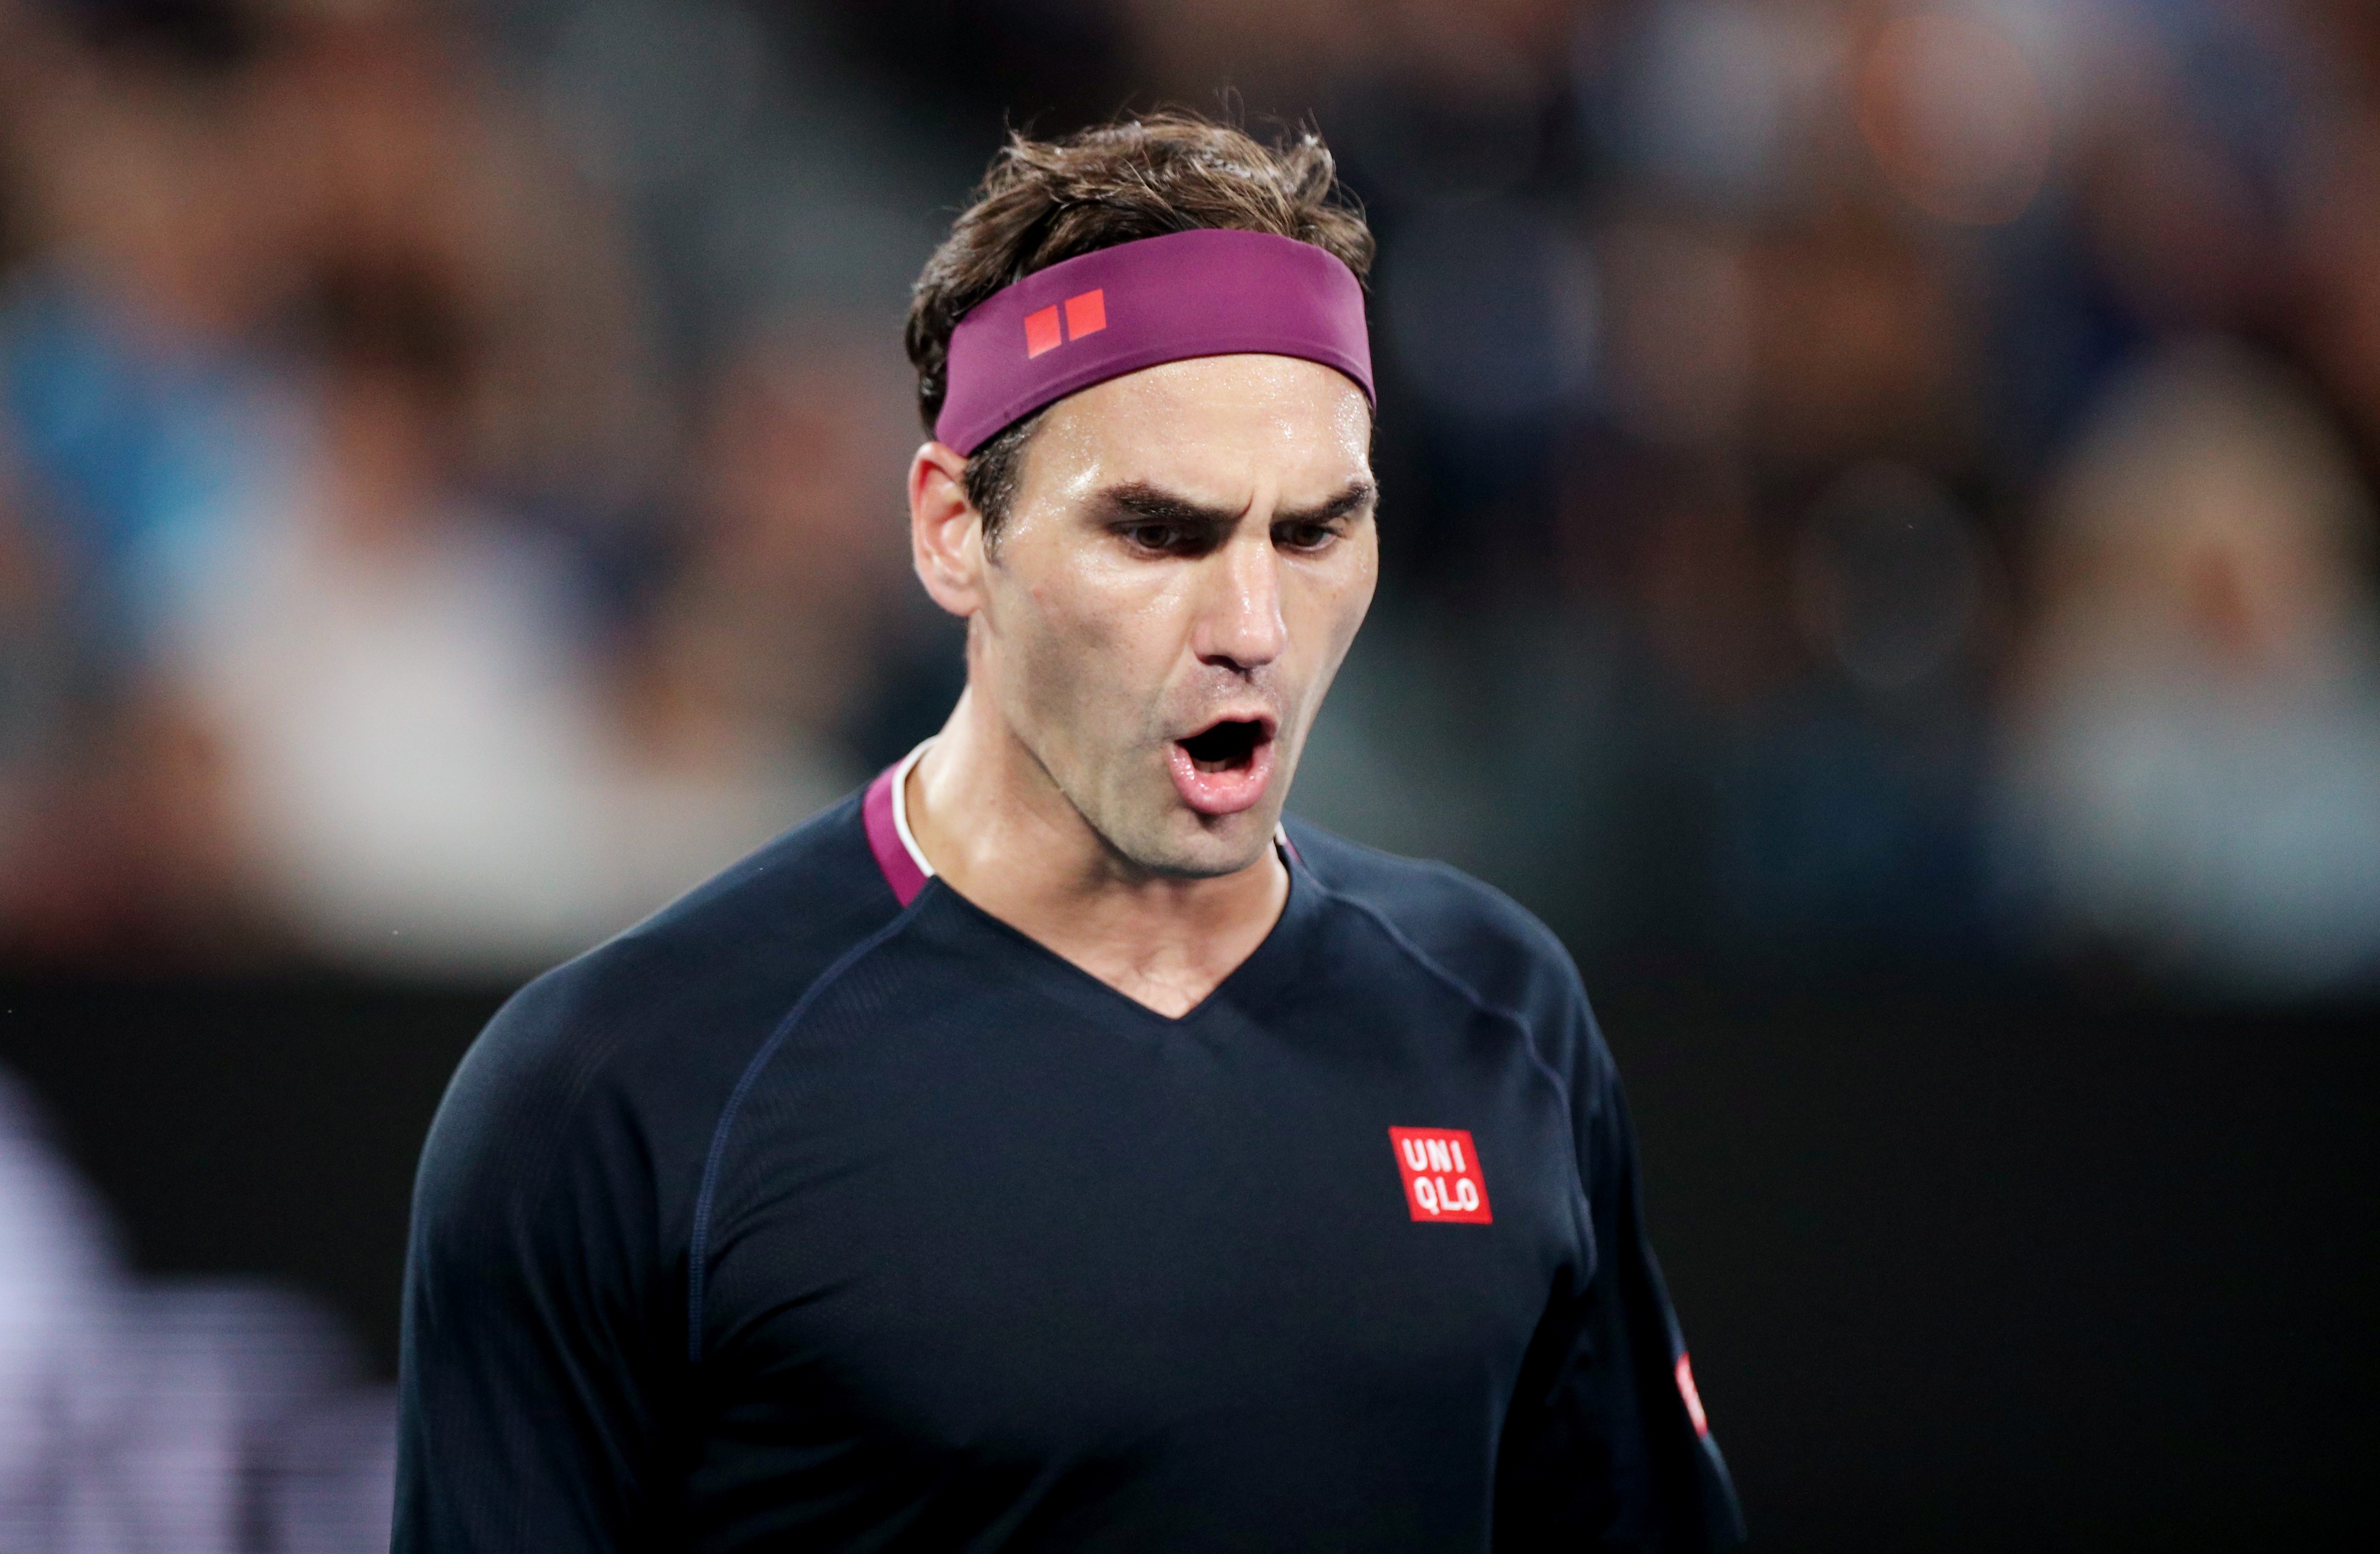 Federer ‘pumped up’ to return to competition in Doha